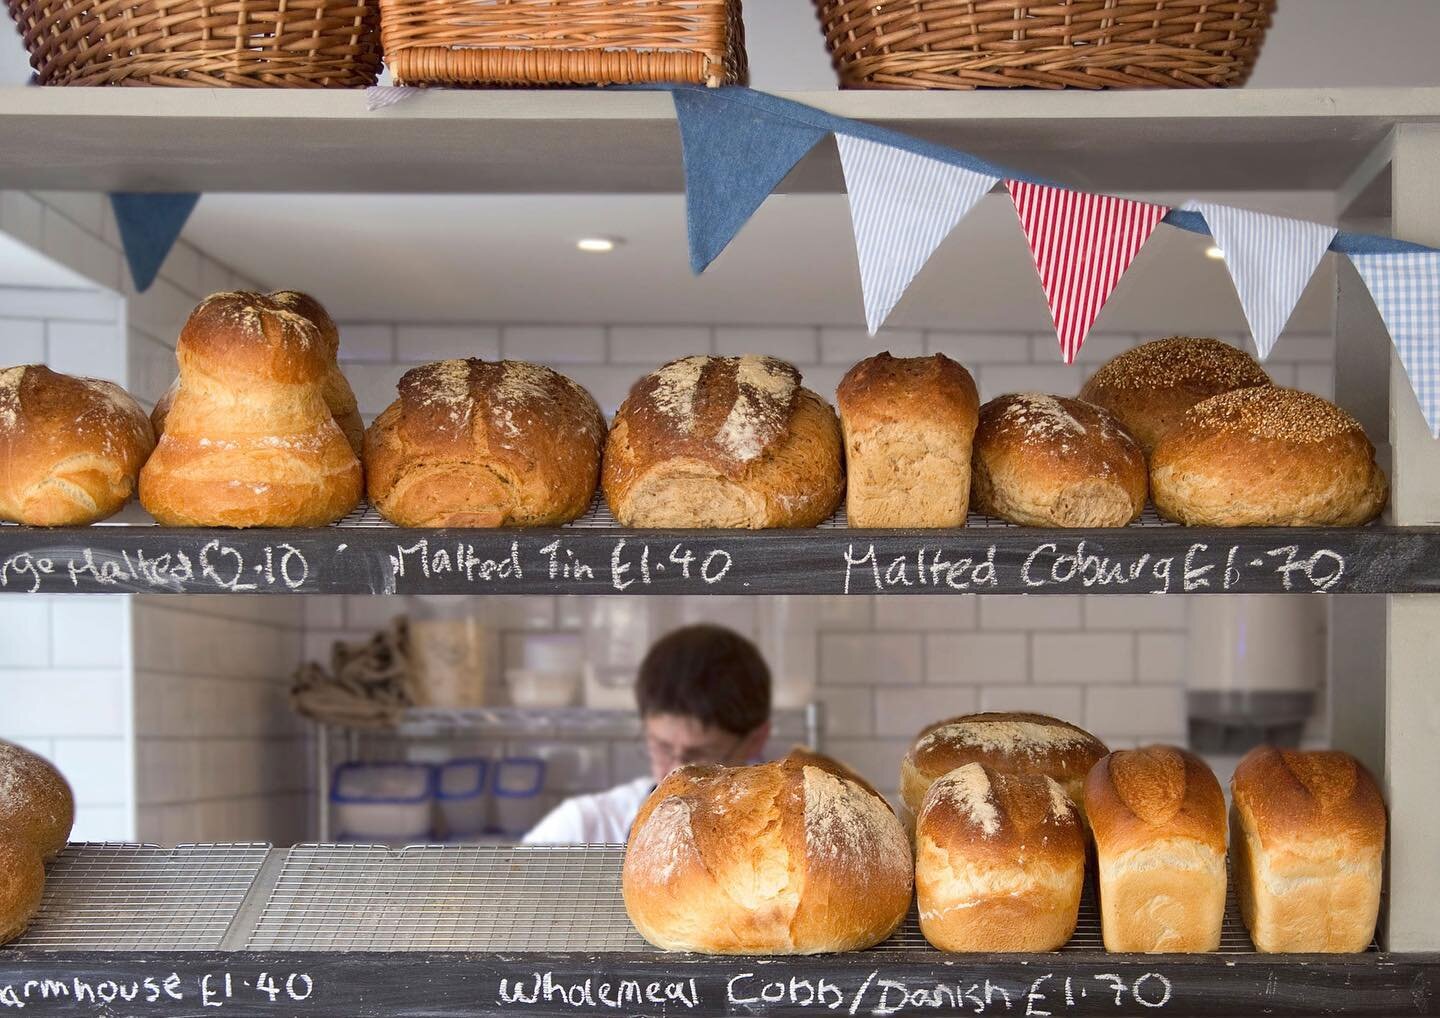 Come by this afternoon and savour our artisanal bread. Each slice is a taste of home. We look forward to sharing it with you. 🍞❤️ 

#breadlove #artisanbread #artisanalbread #bakeryonthewater #bourtononthewater #britishbakery #cotswoldsbakery #cotswo